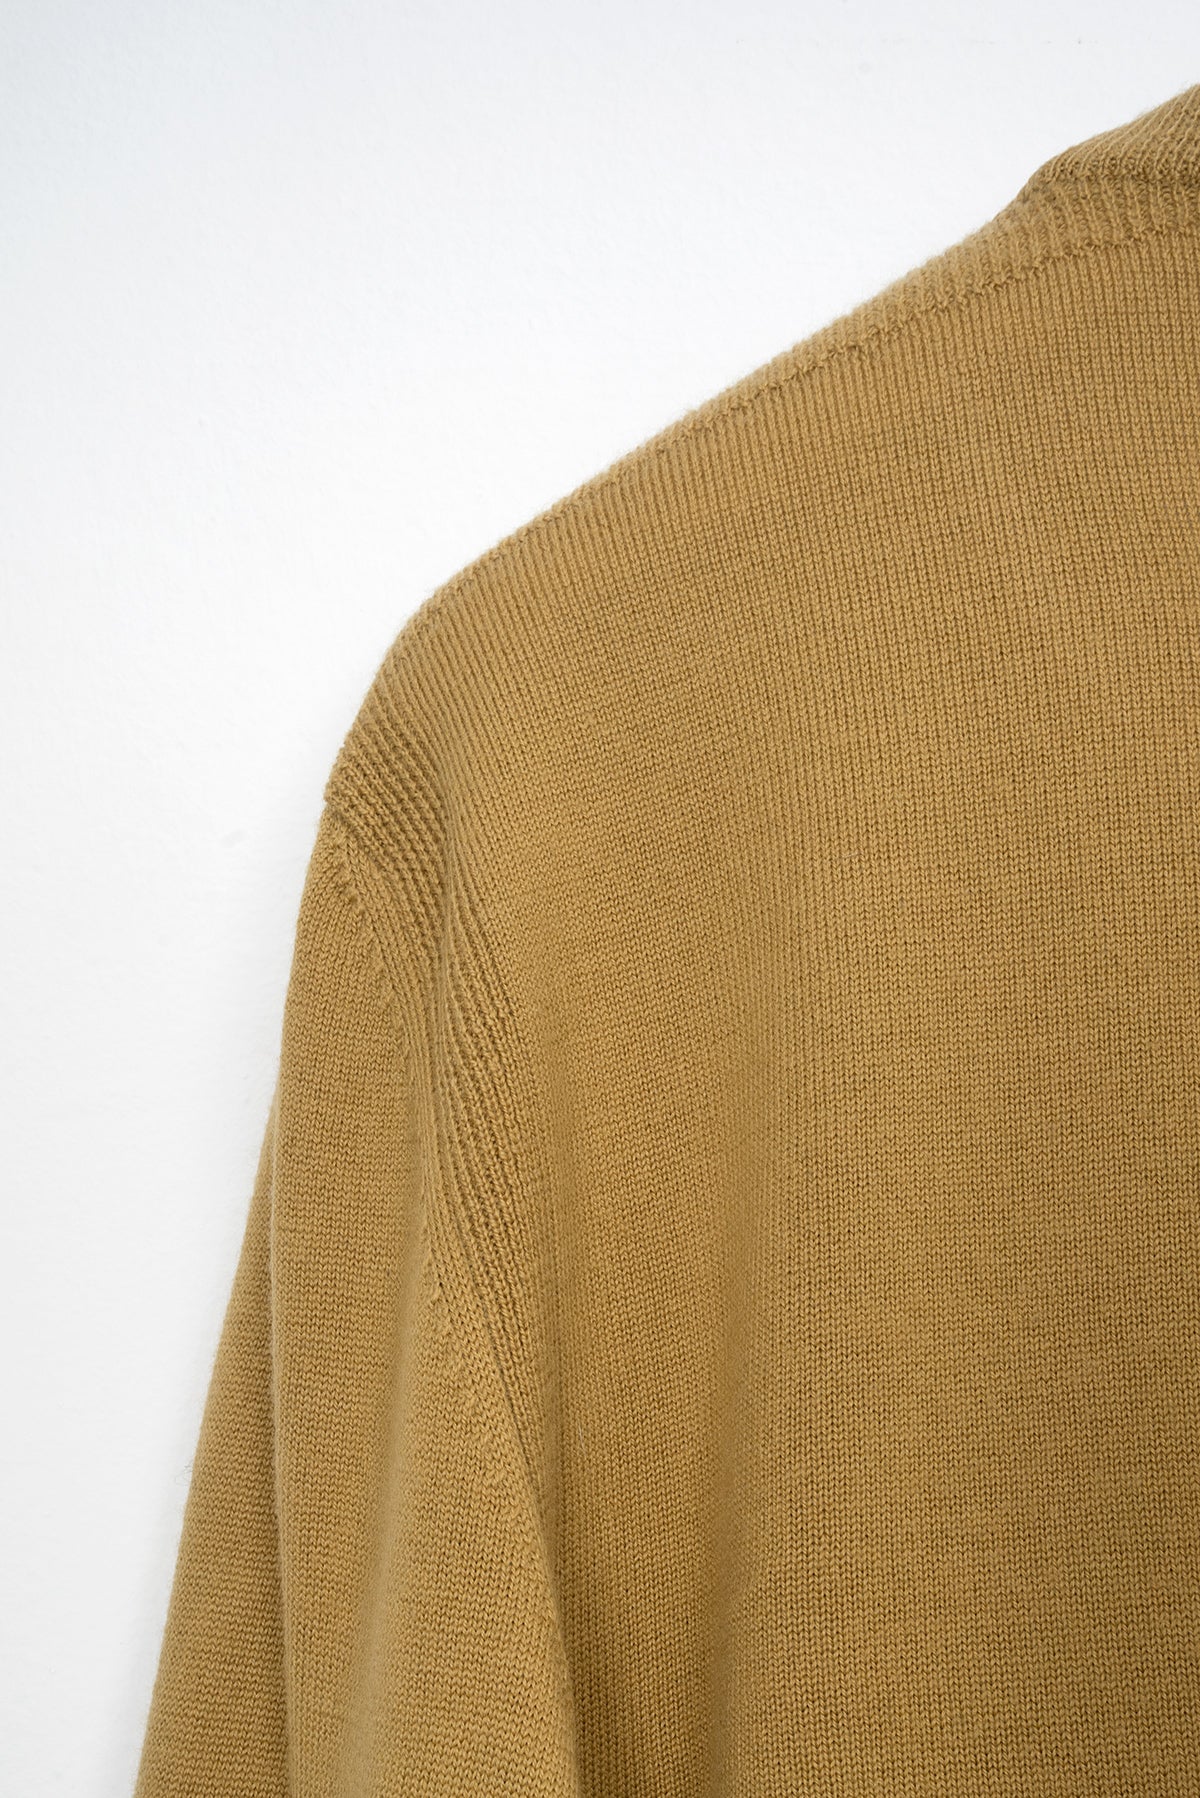 2008 A/W CREWNECK SWEATER WITH RIBBING DETAILS IN FINEST WOOL